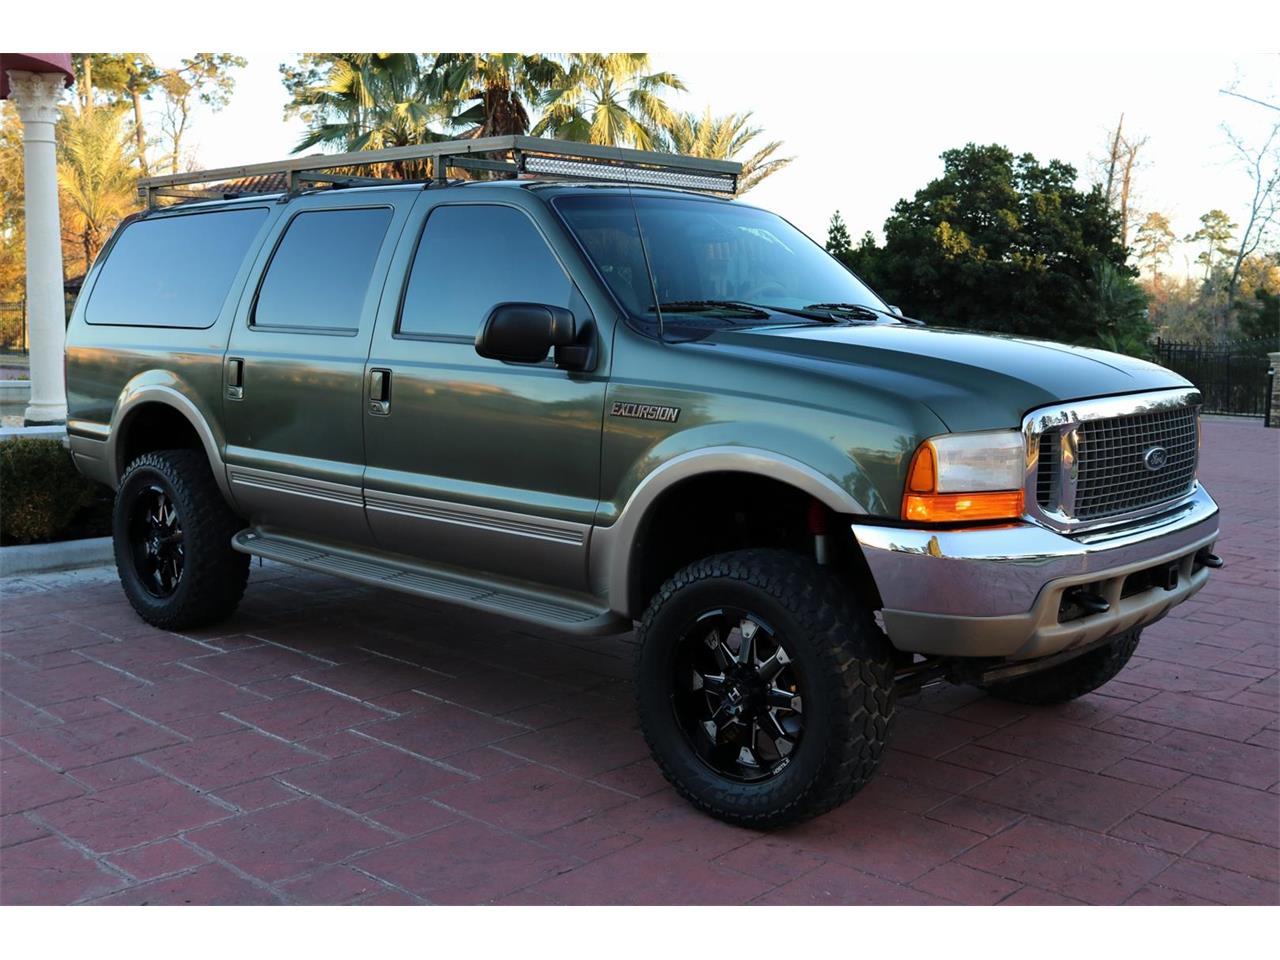 excursion diesel for sale in texas